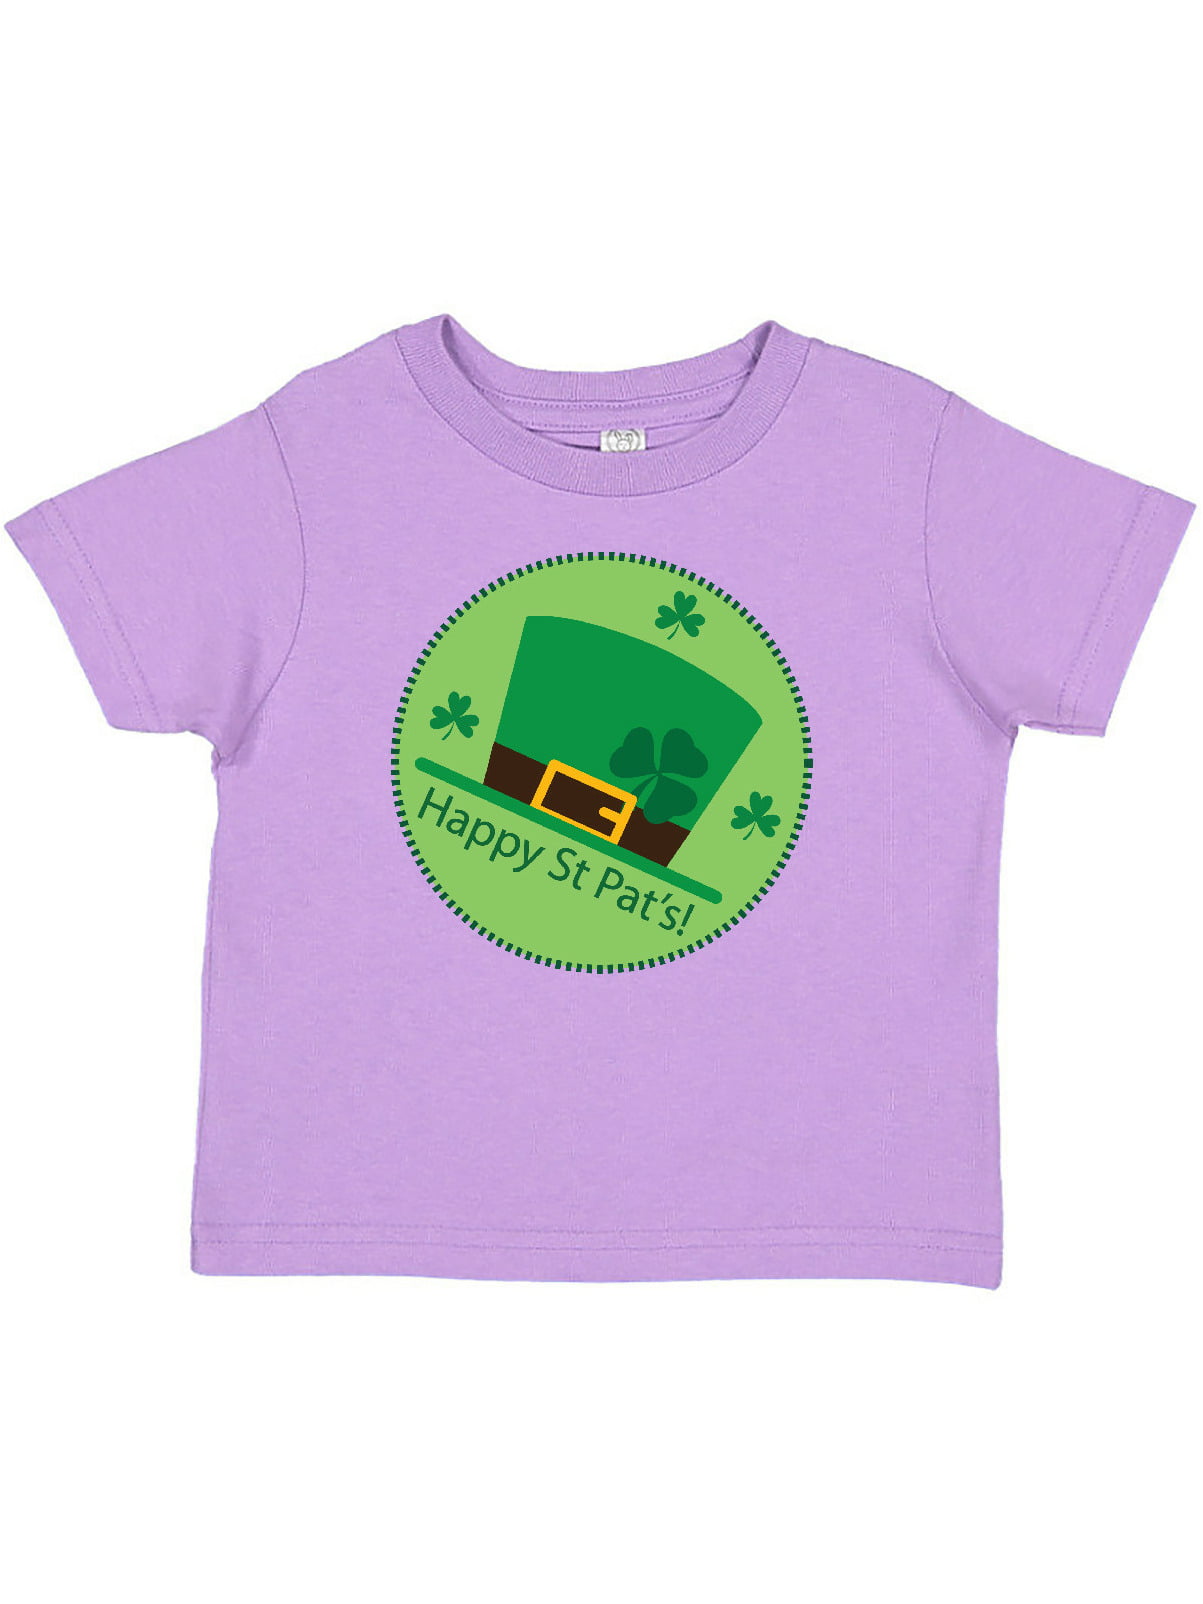 Happy St Patricks Day New Personalized Baby Boys Girls T-shirt Tees Clothing 